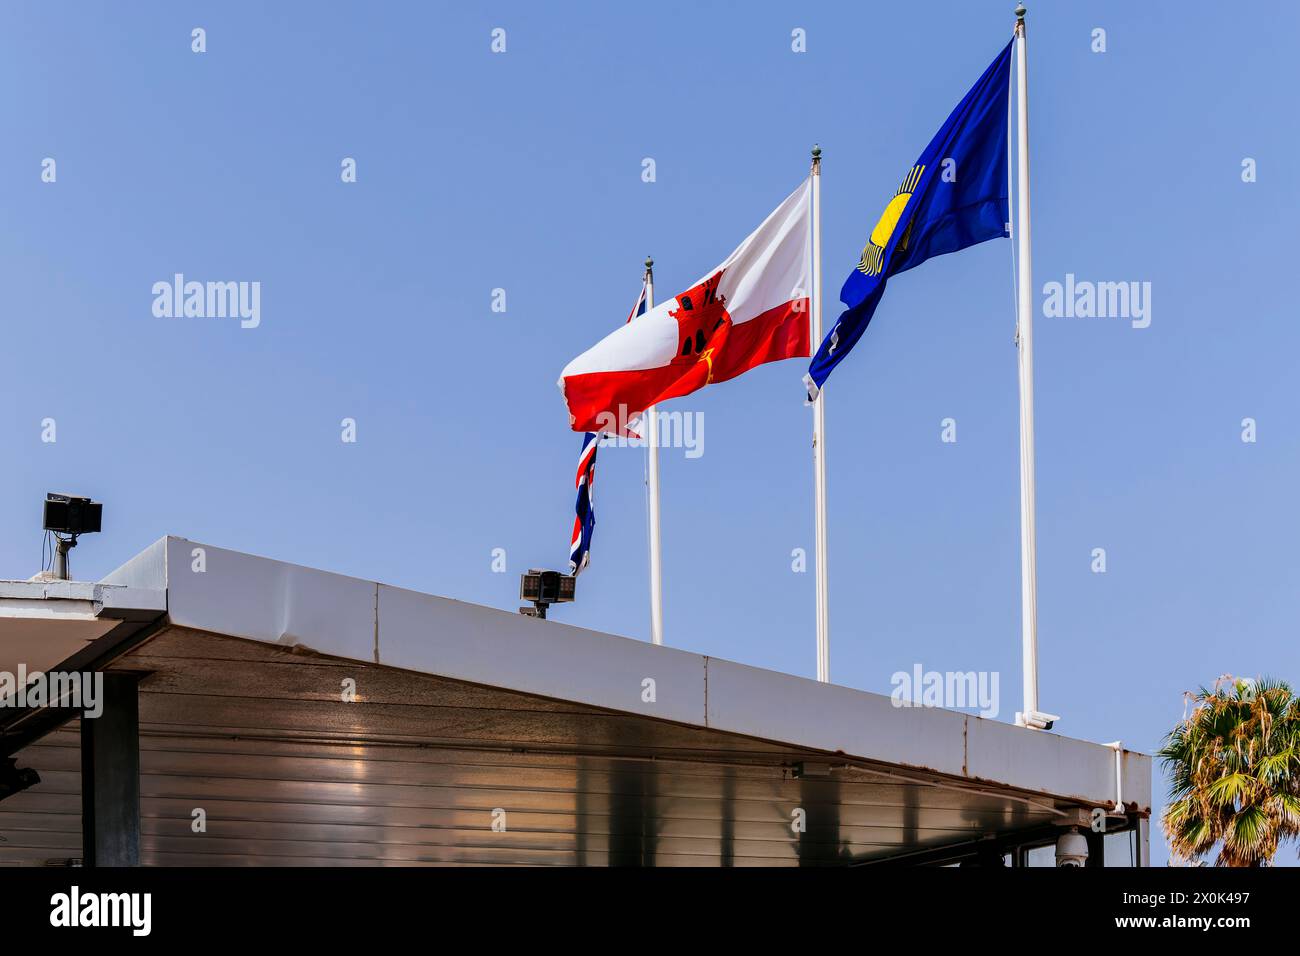 Union Jack flag, Flag of Gibraltar and Flag of the Commonwealth. Border crossing between Gibraltar and Spain. Gibraltar side. Gibraltar, British Overs Stock Photo